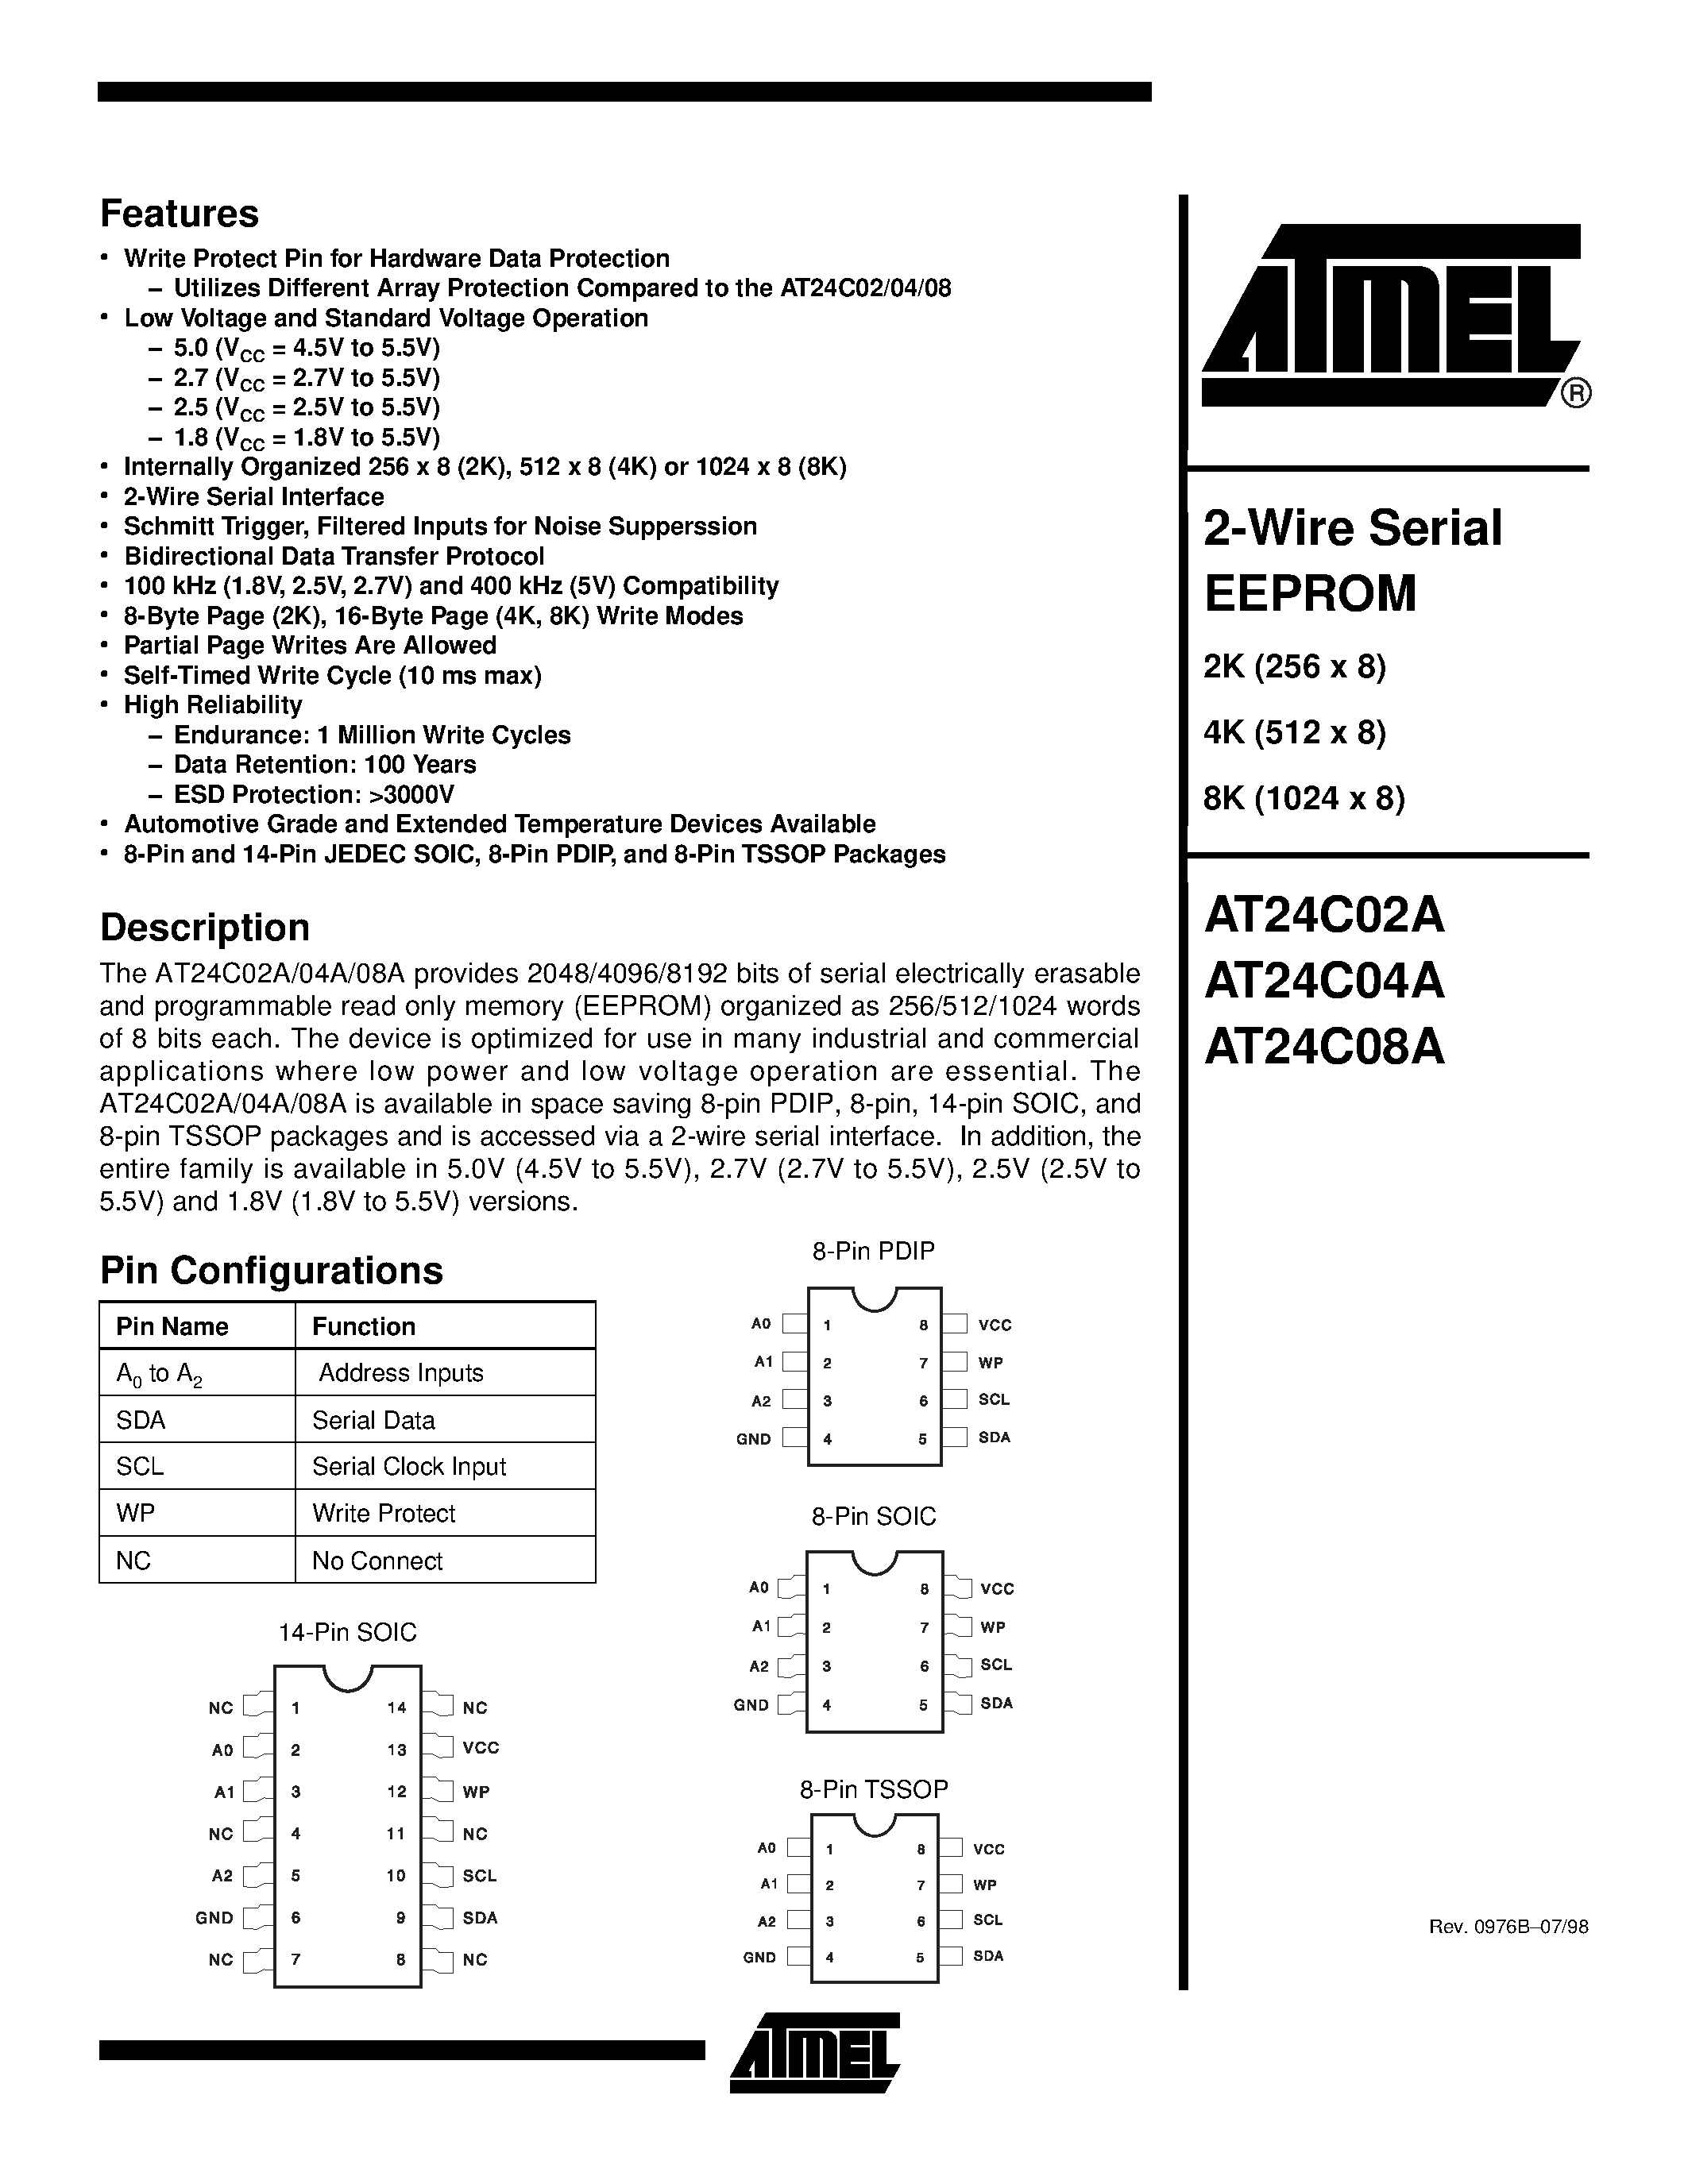 Даташит AT24C02A-10PC-2.7 - 2-Wire Serial EEPROM страница 1